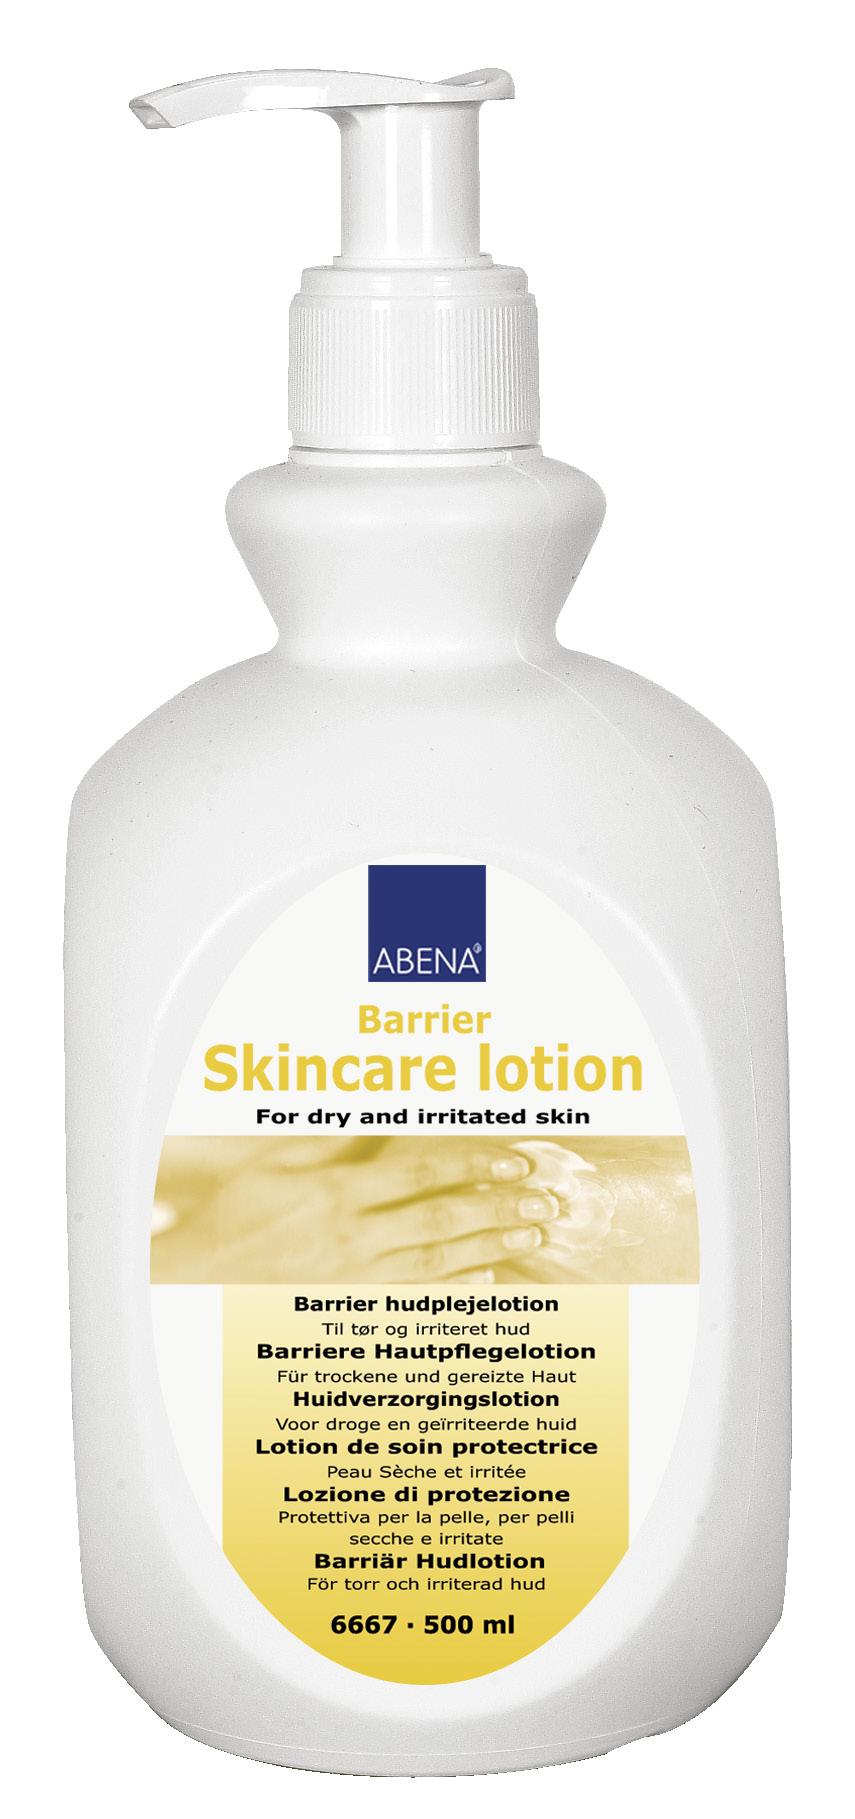 The Skin Care Barrier Lotion leaves a protective barrier on the skin and maintains a healthy moisture level.